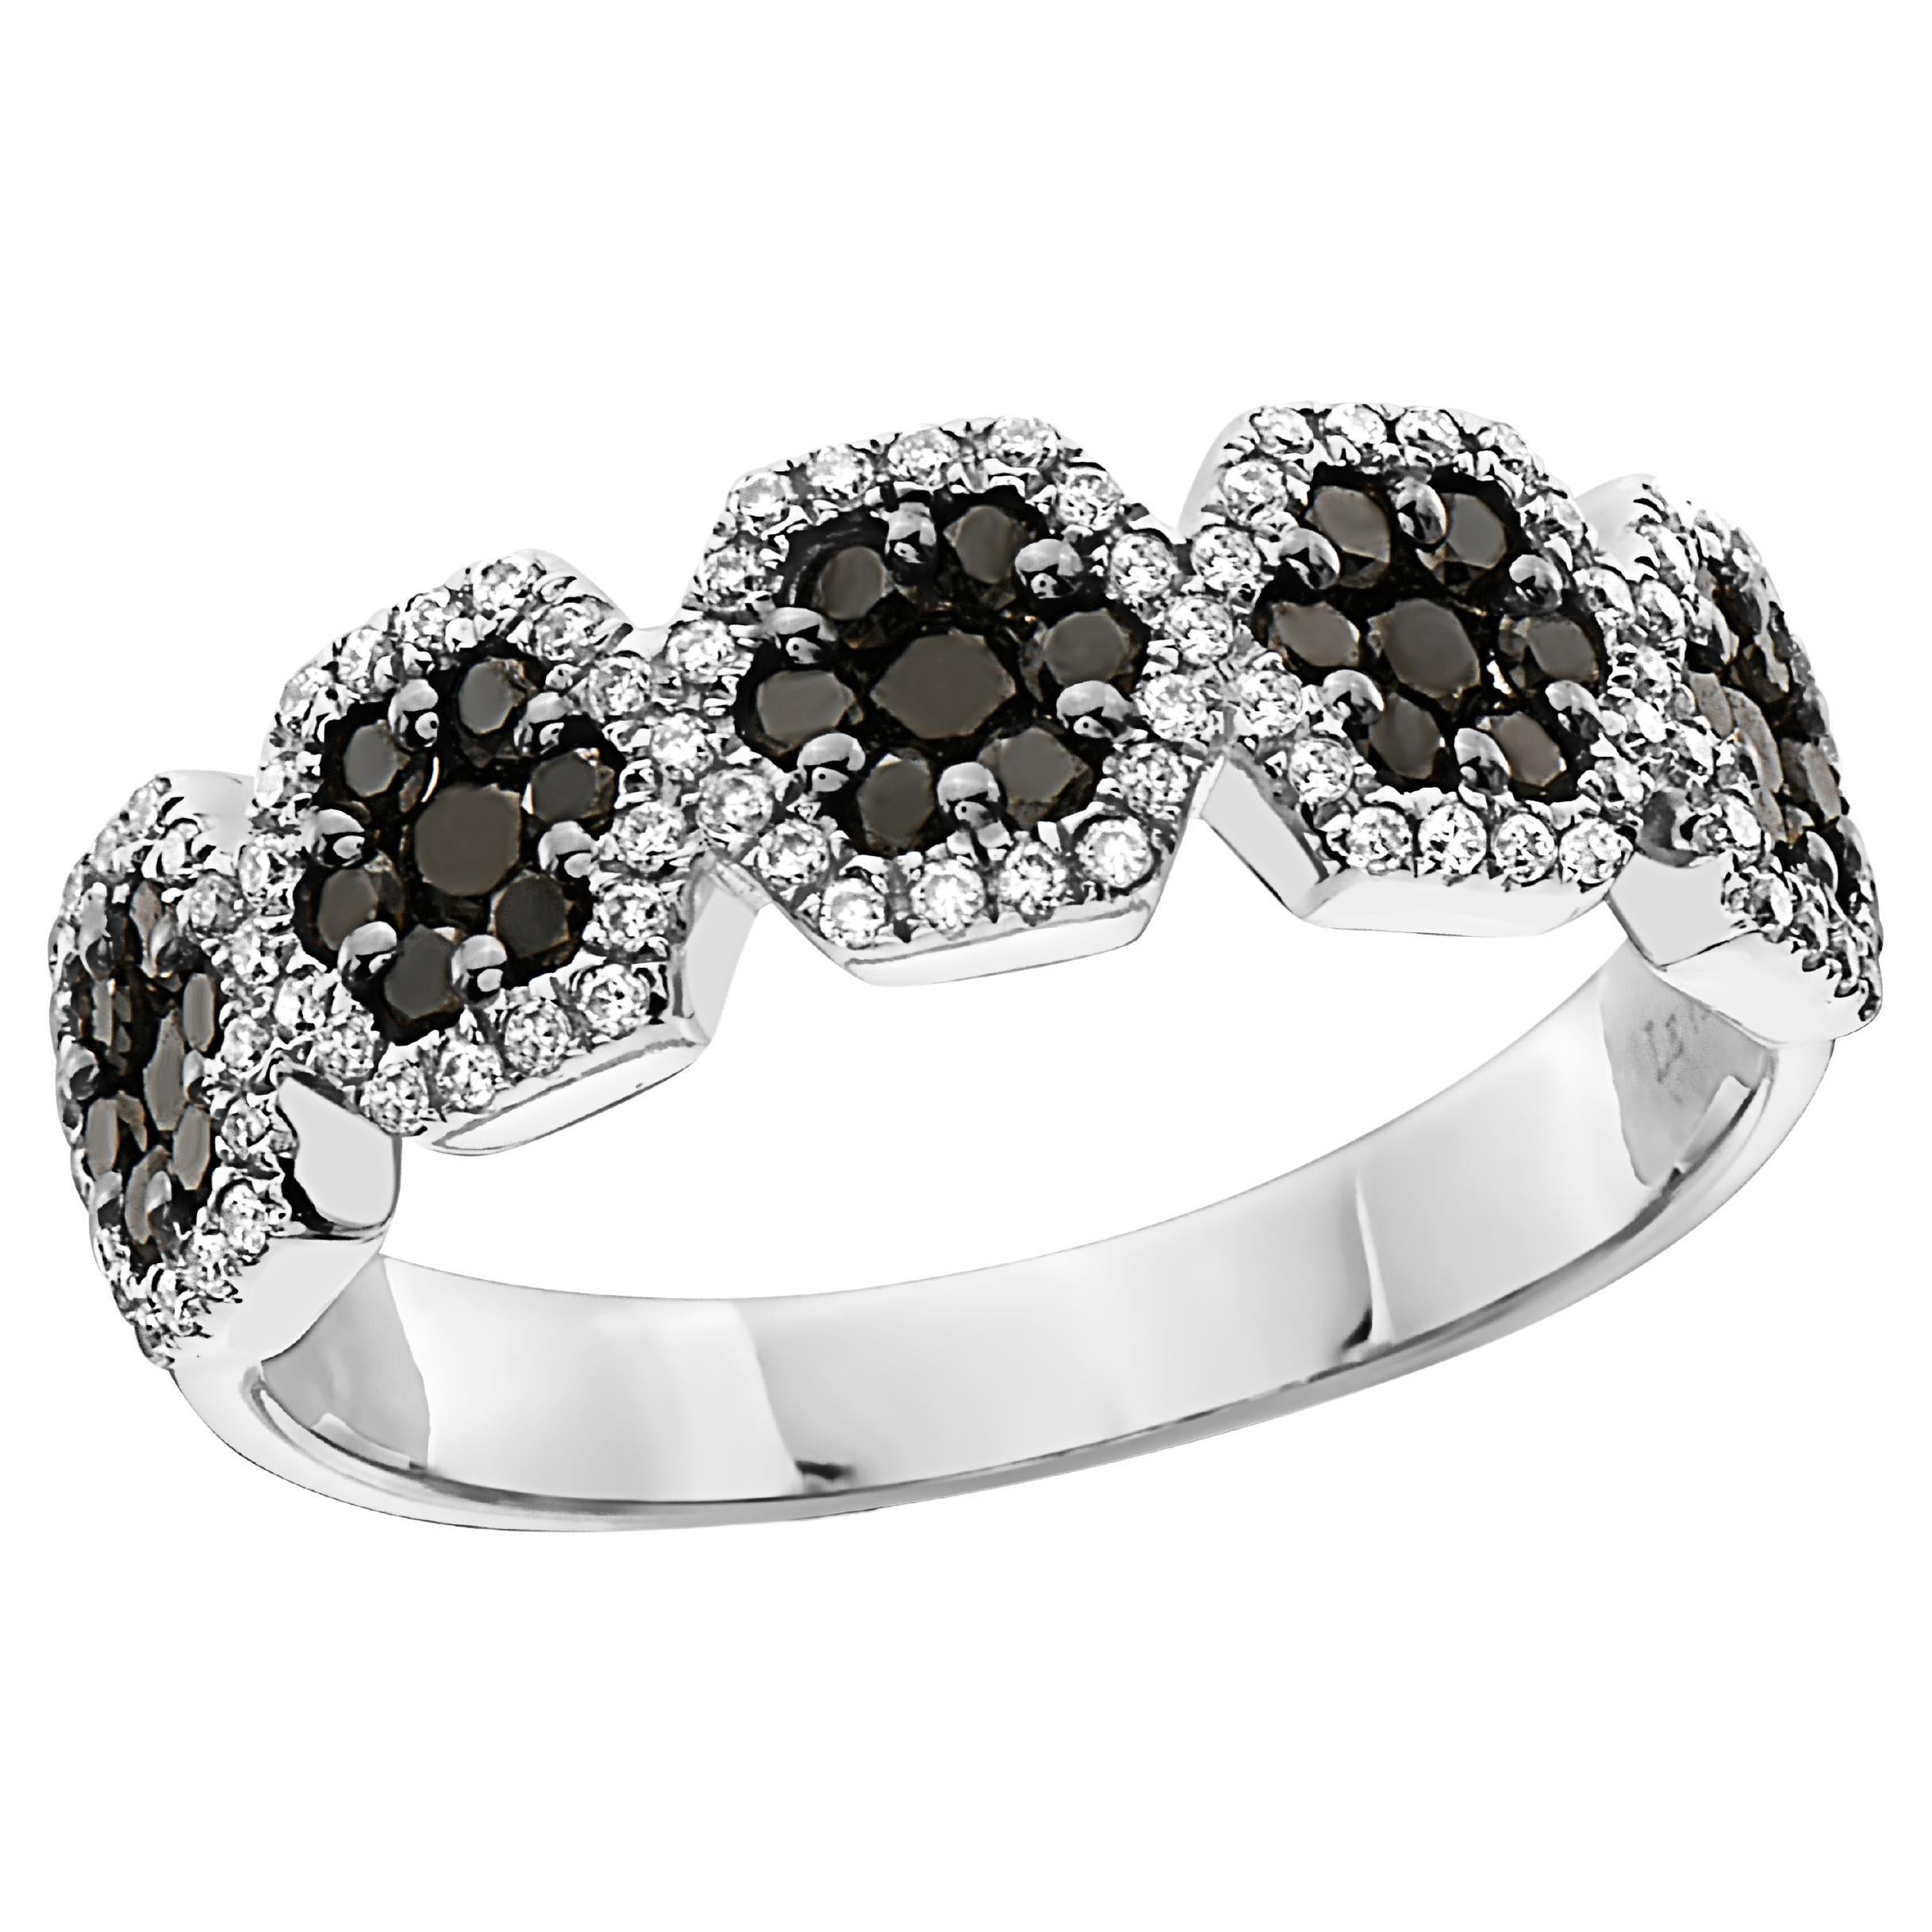 Levian Ring 3 4 Cts Black and White I S12 Natural Diamonds Set in 14K White Gold For Sale